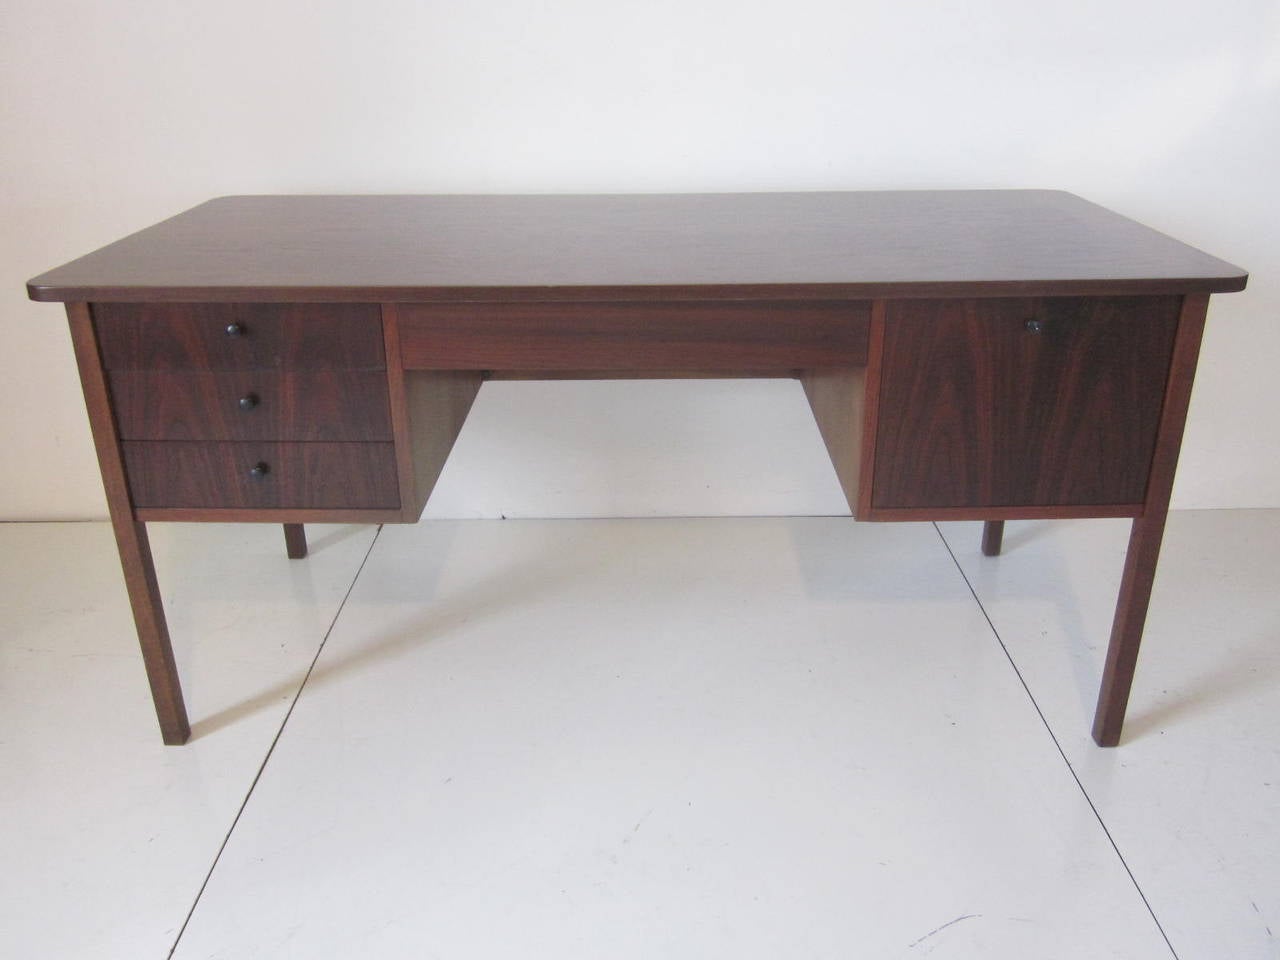 A Danish styled Brazilian rosewood and dark walnut desk with three side drawers, center drawer, large file drawer and a beautifully grained top. On the reversed side is a small caned privacy panel.